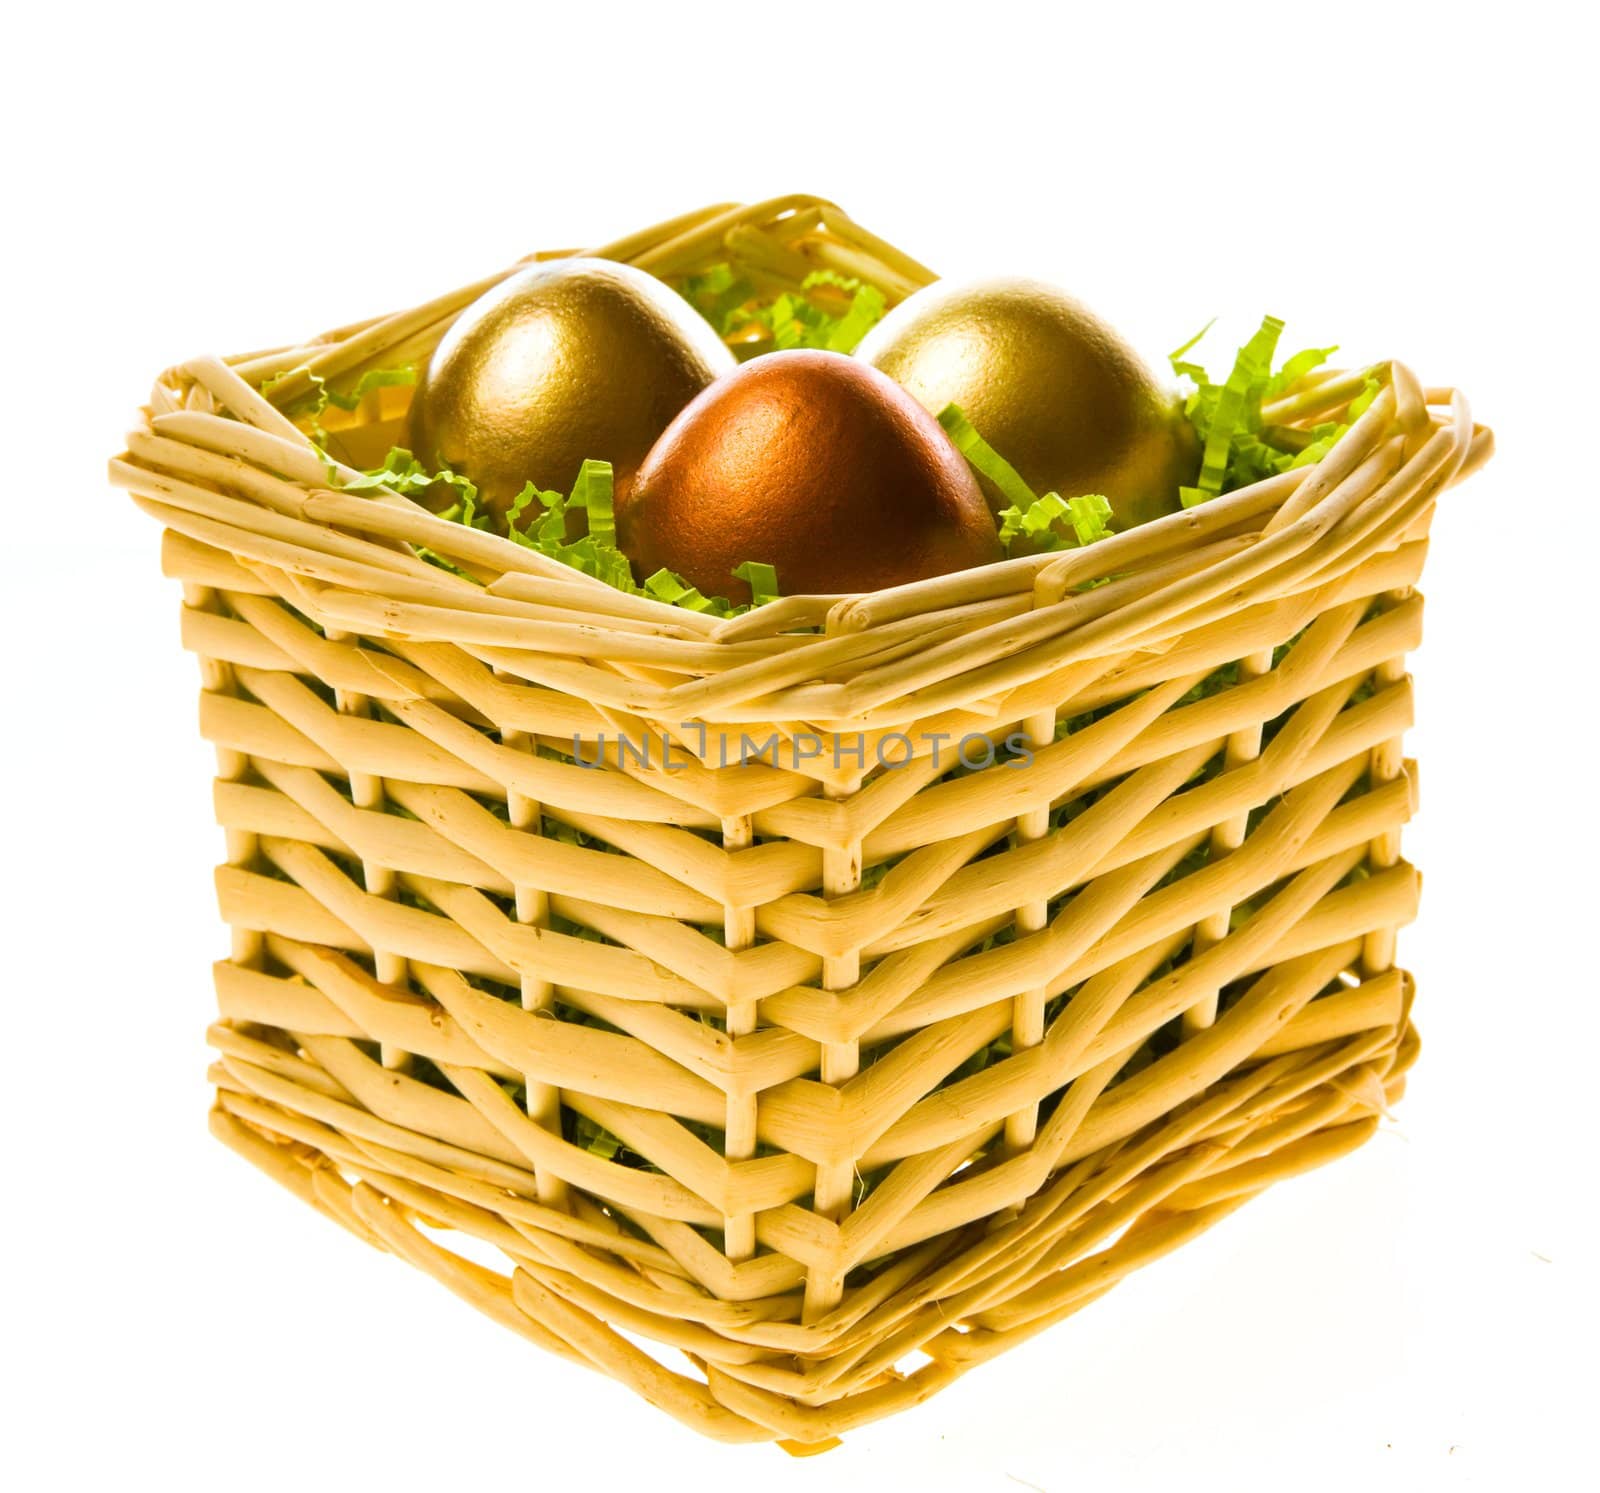 Three eggs, two gold and one bronze in a small basket on a white background
